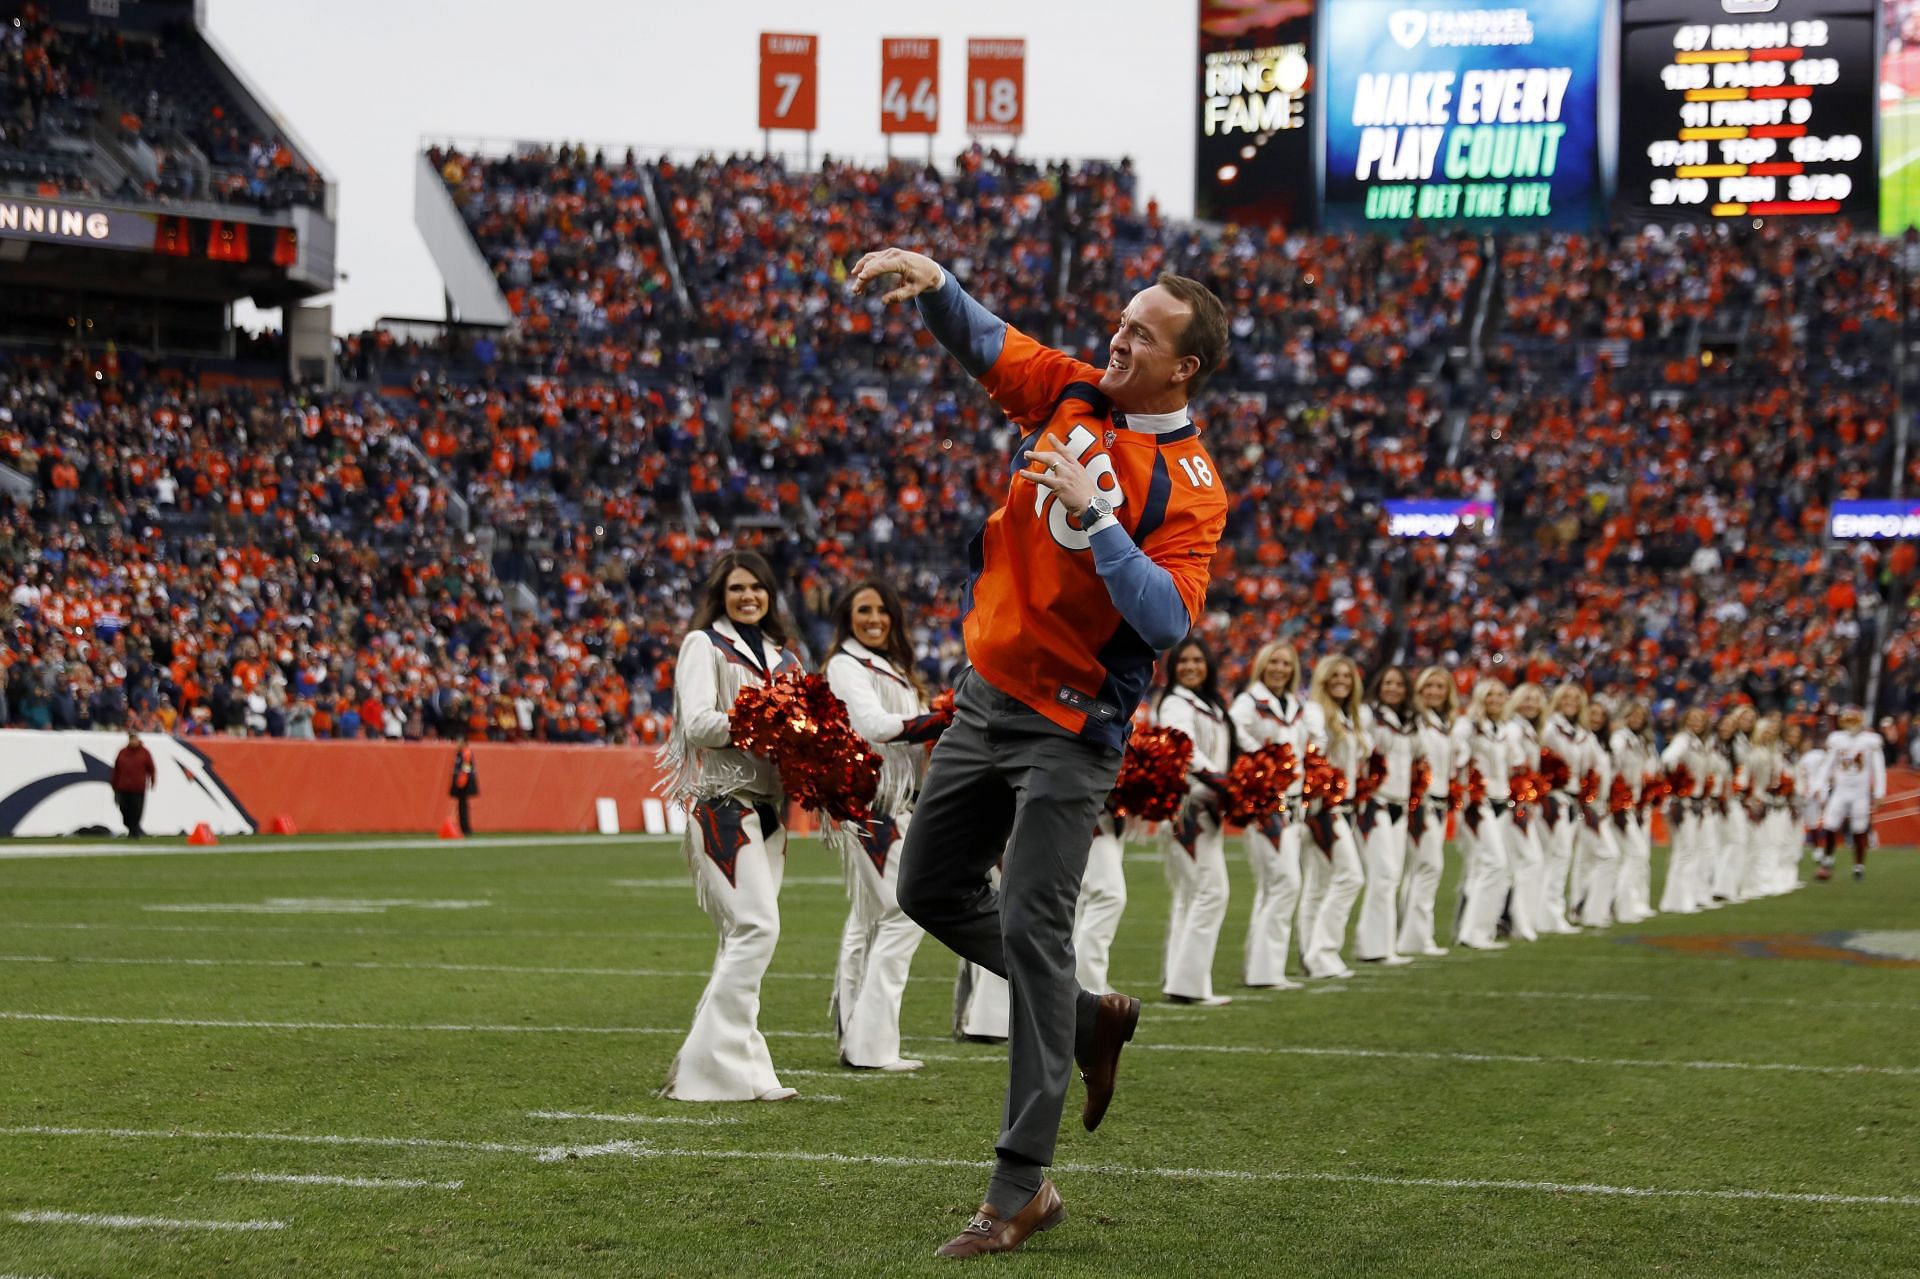 John Elway and Peyton Manning to compete for Broncos ownership